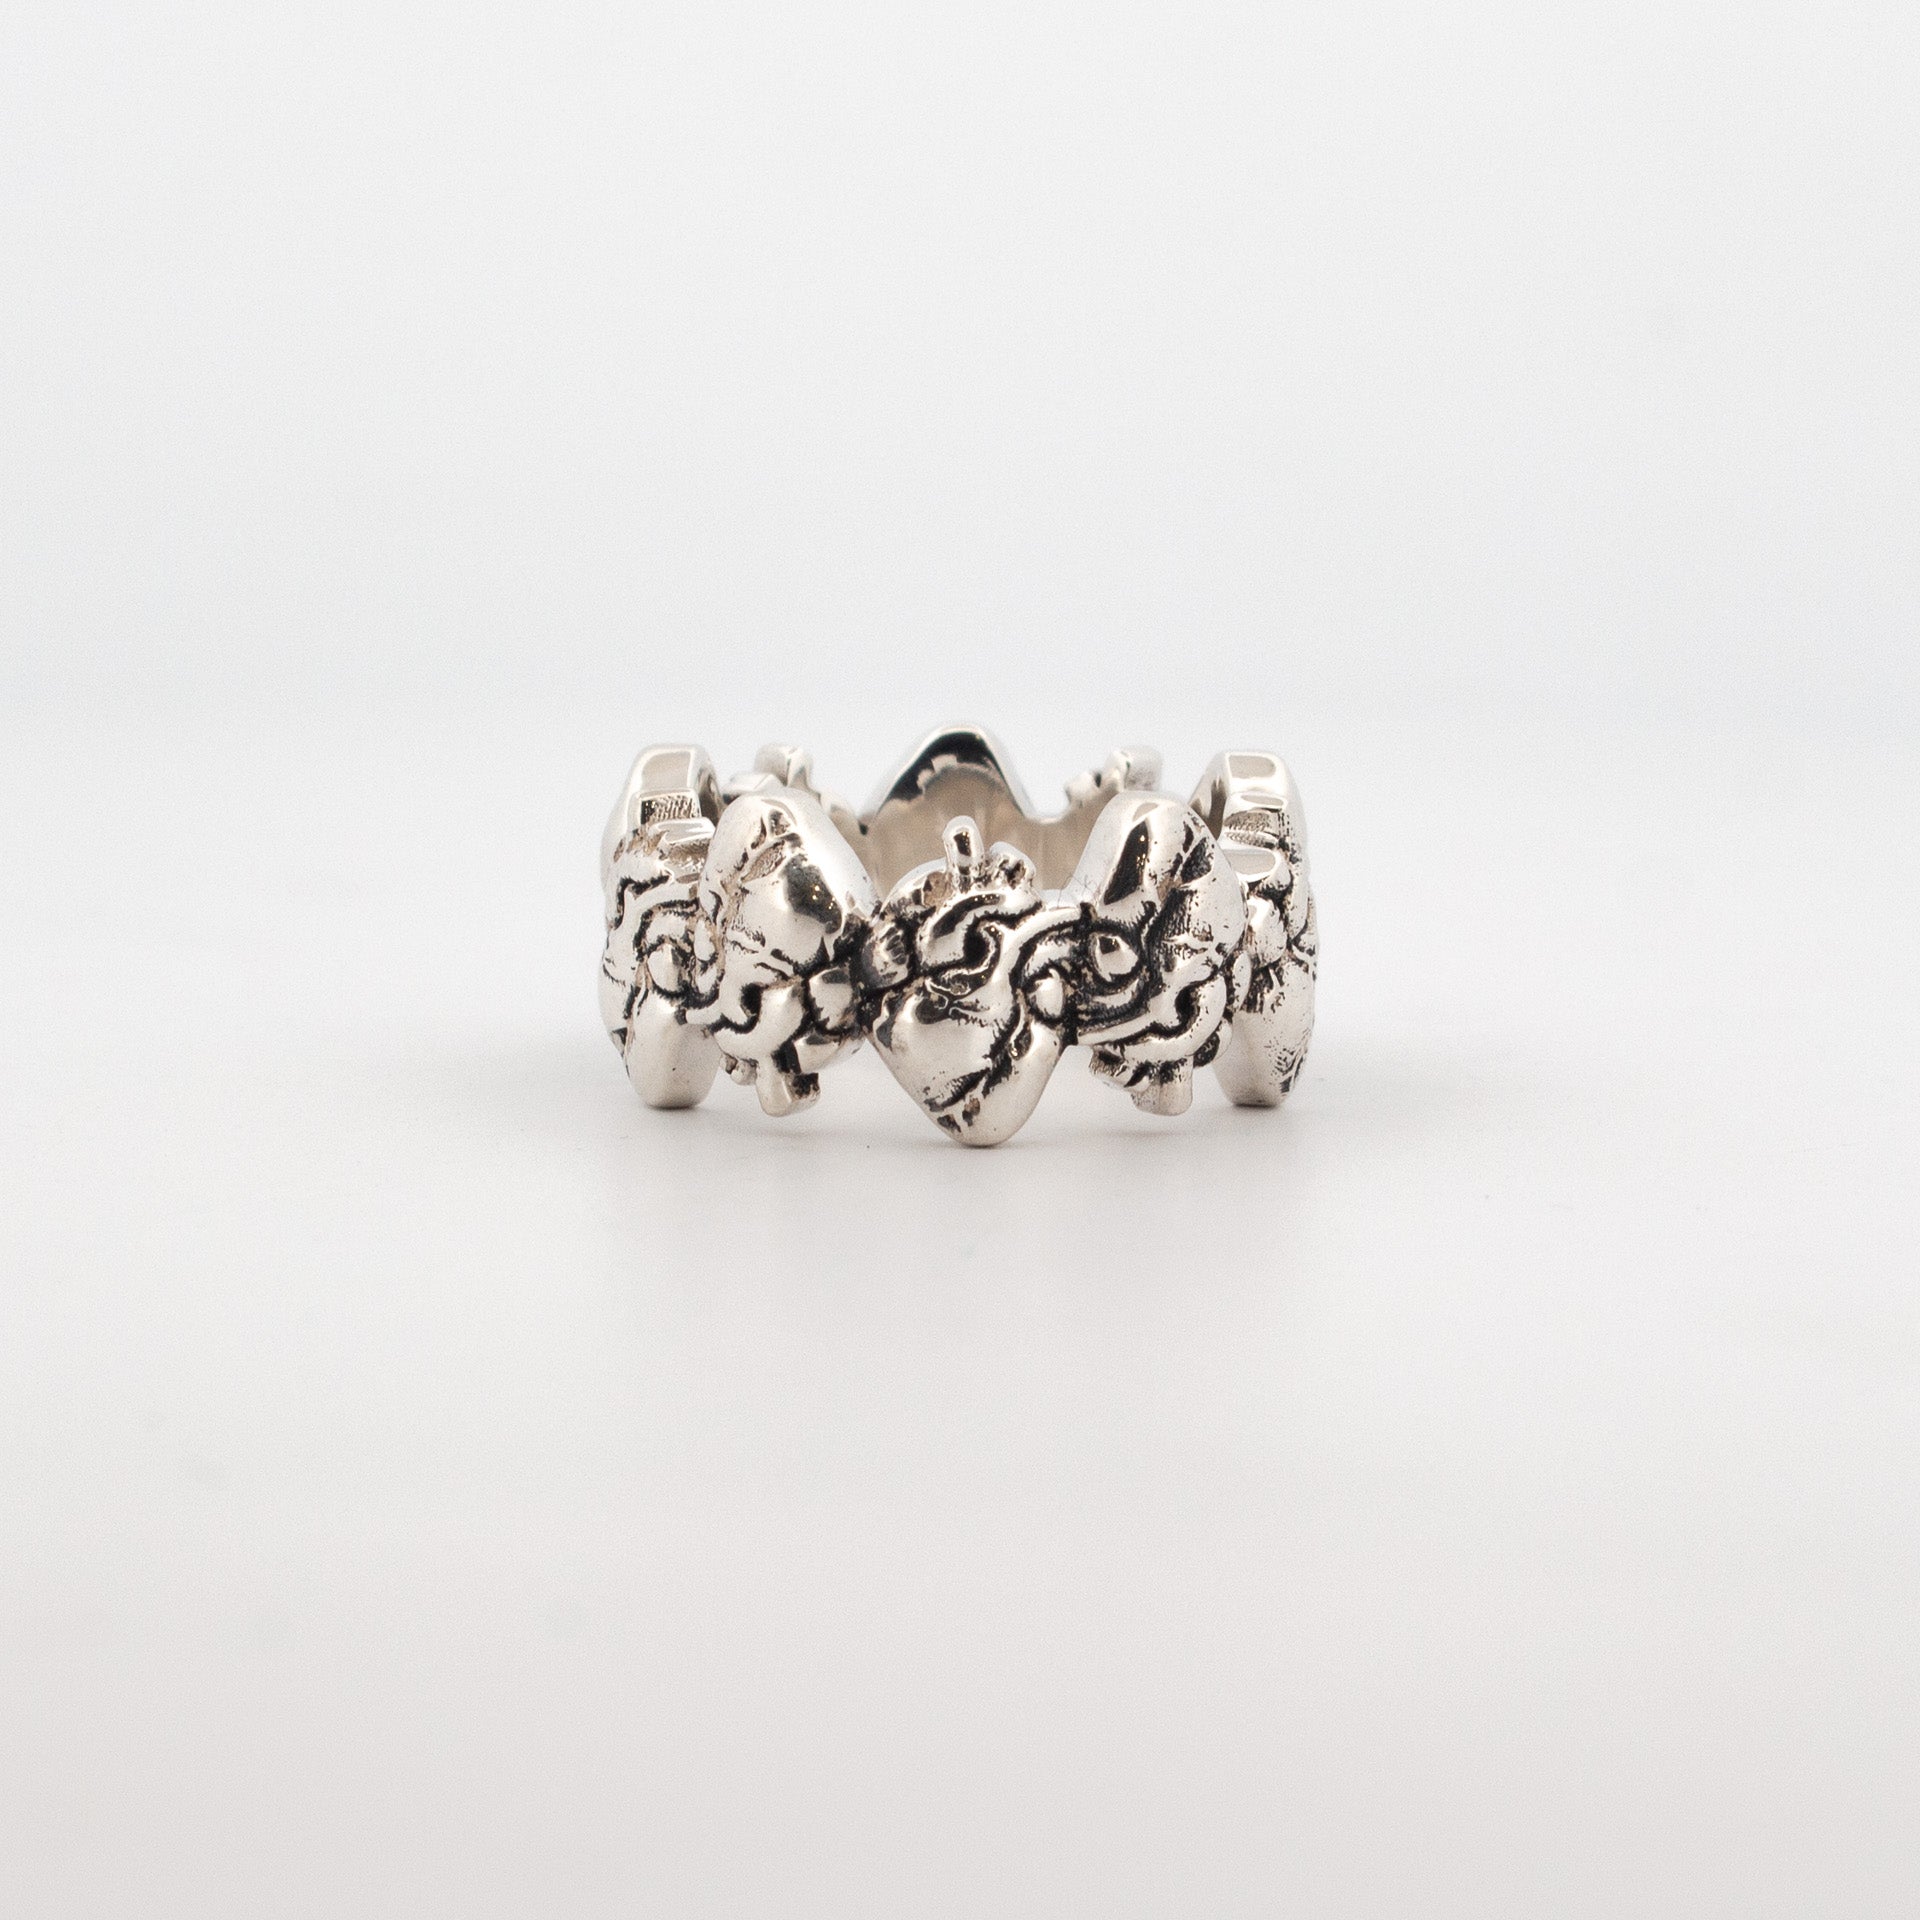 Connected Hearts ring